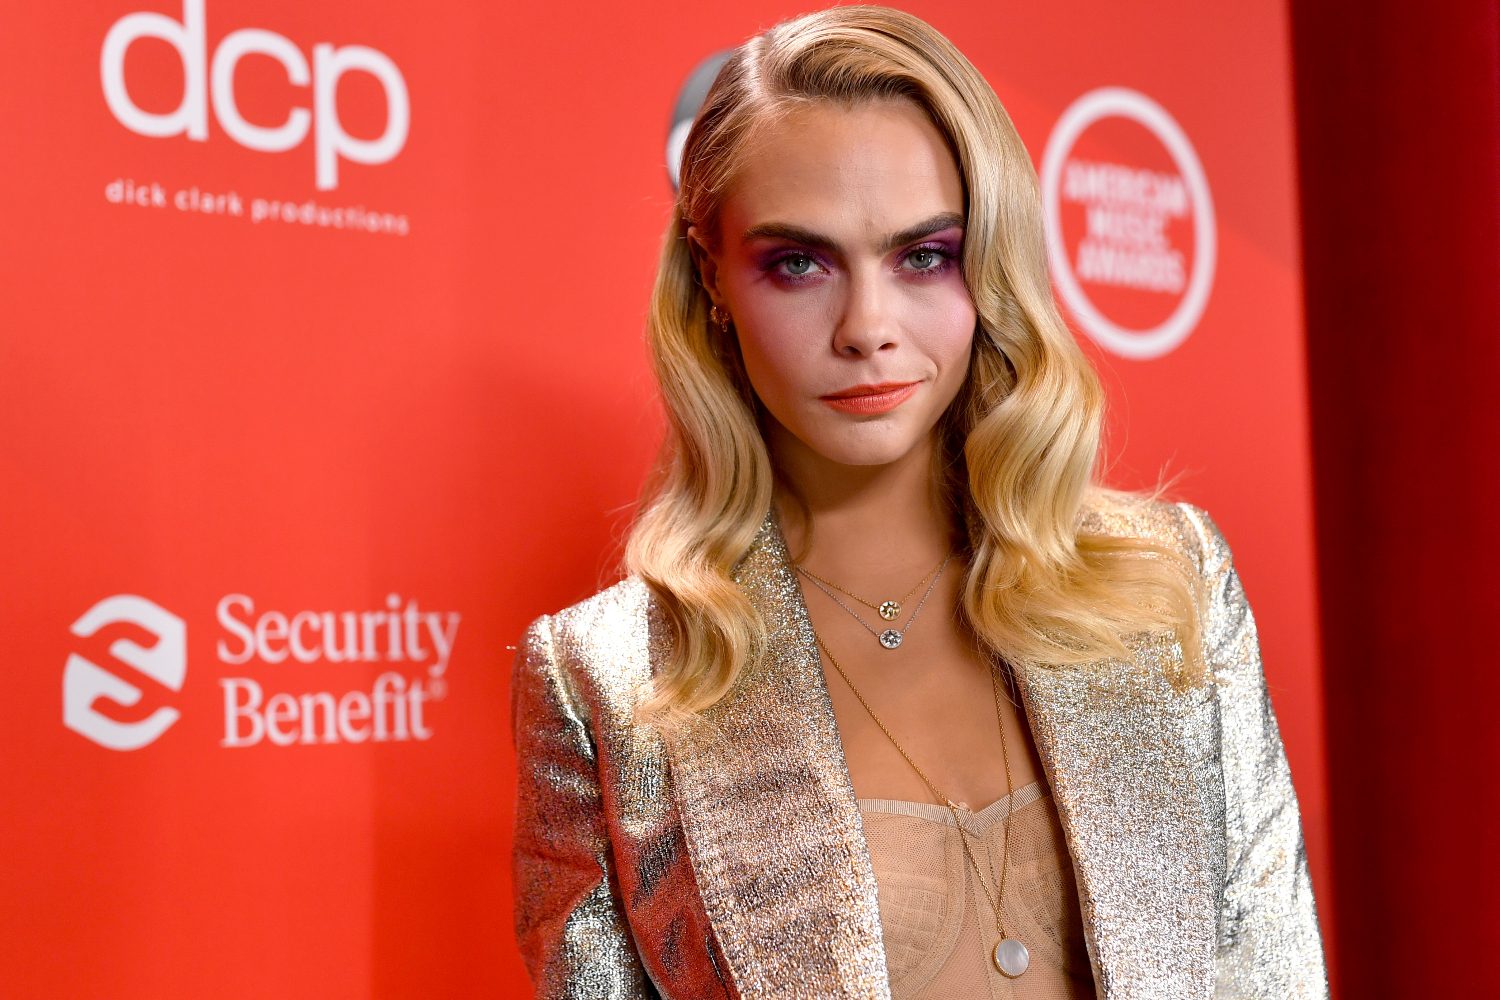 Cara Delevingne attends the 2020 American Music Awards at Microsoft Theater on November 22, 2020 in Los Angeles, California